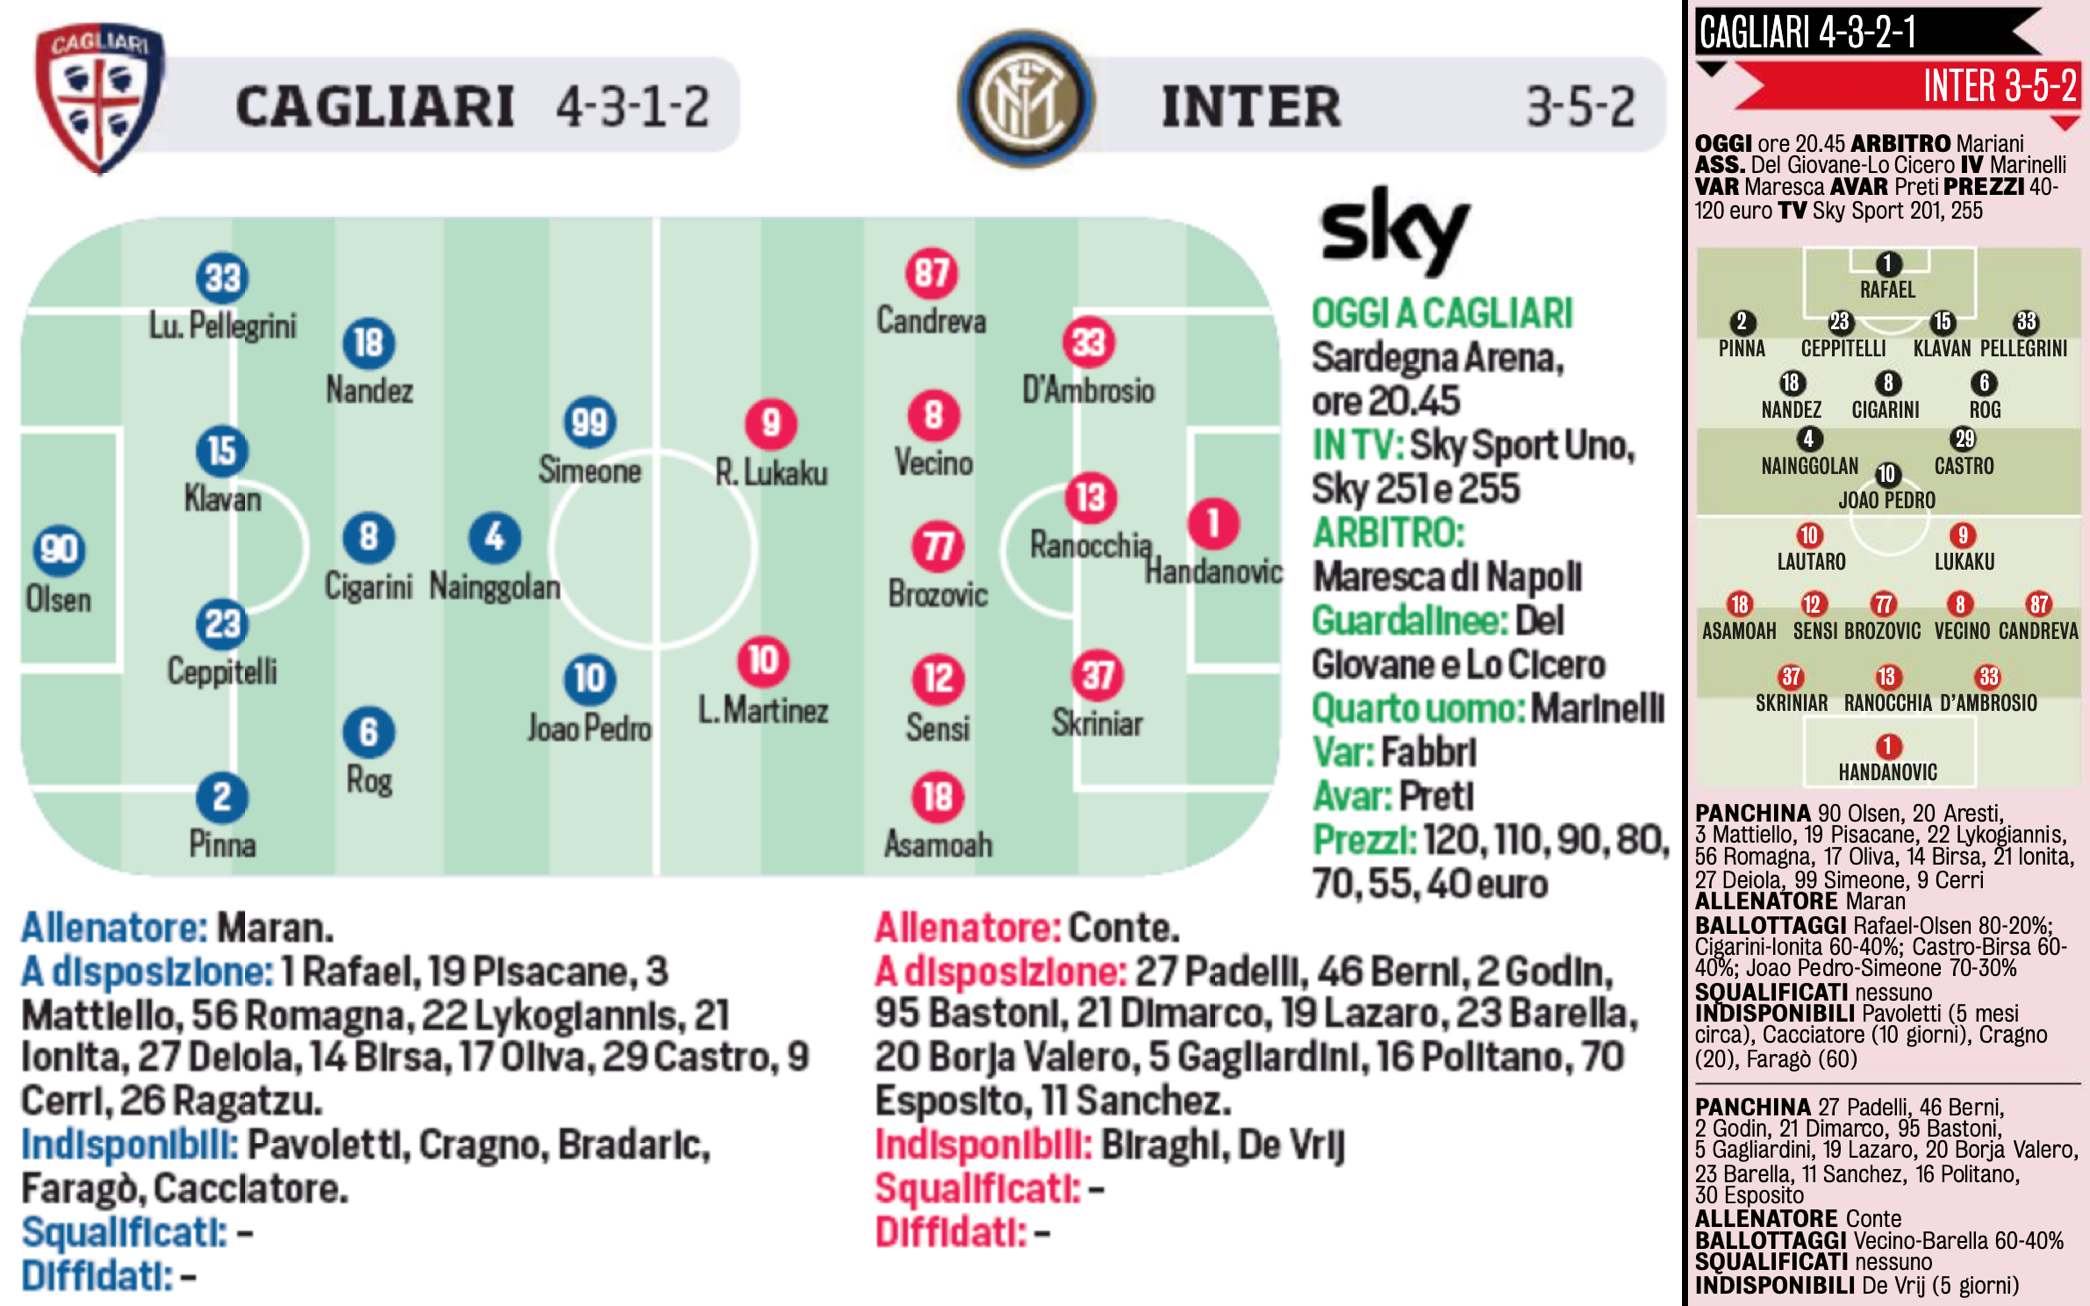 Serie A matchday 2: Cagliari vs. Inter probable lineups - Can we make it two wins out of two against our old friend Nainggolan? - FedeNerazzurra